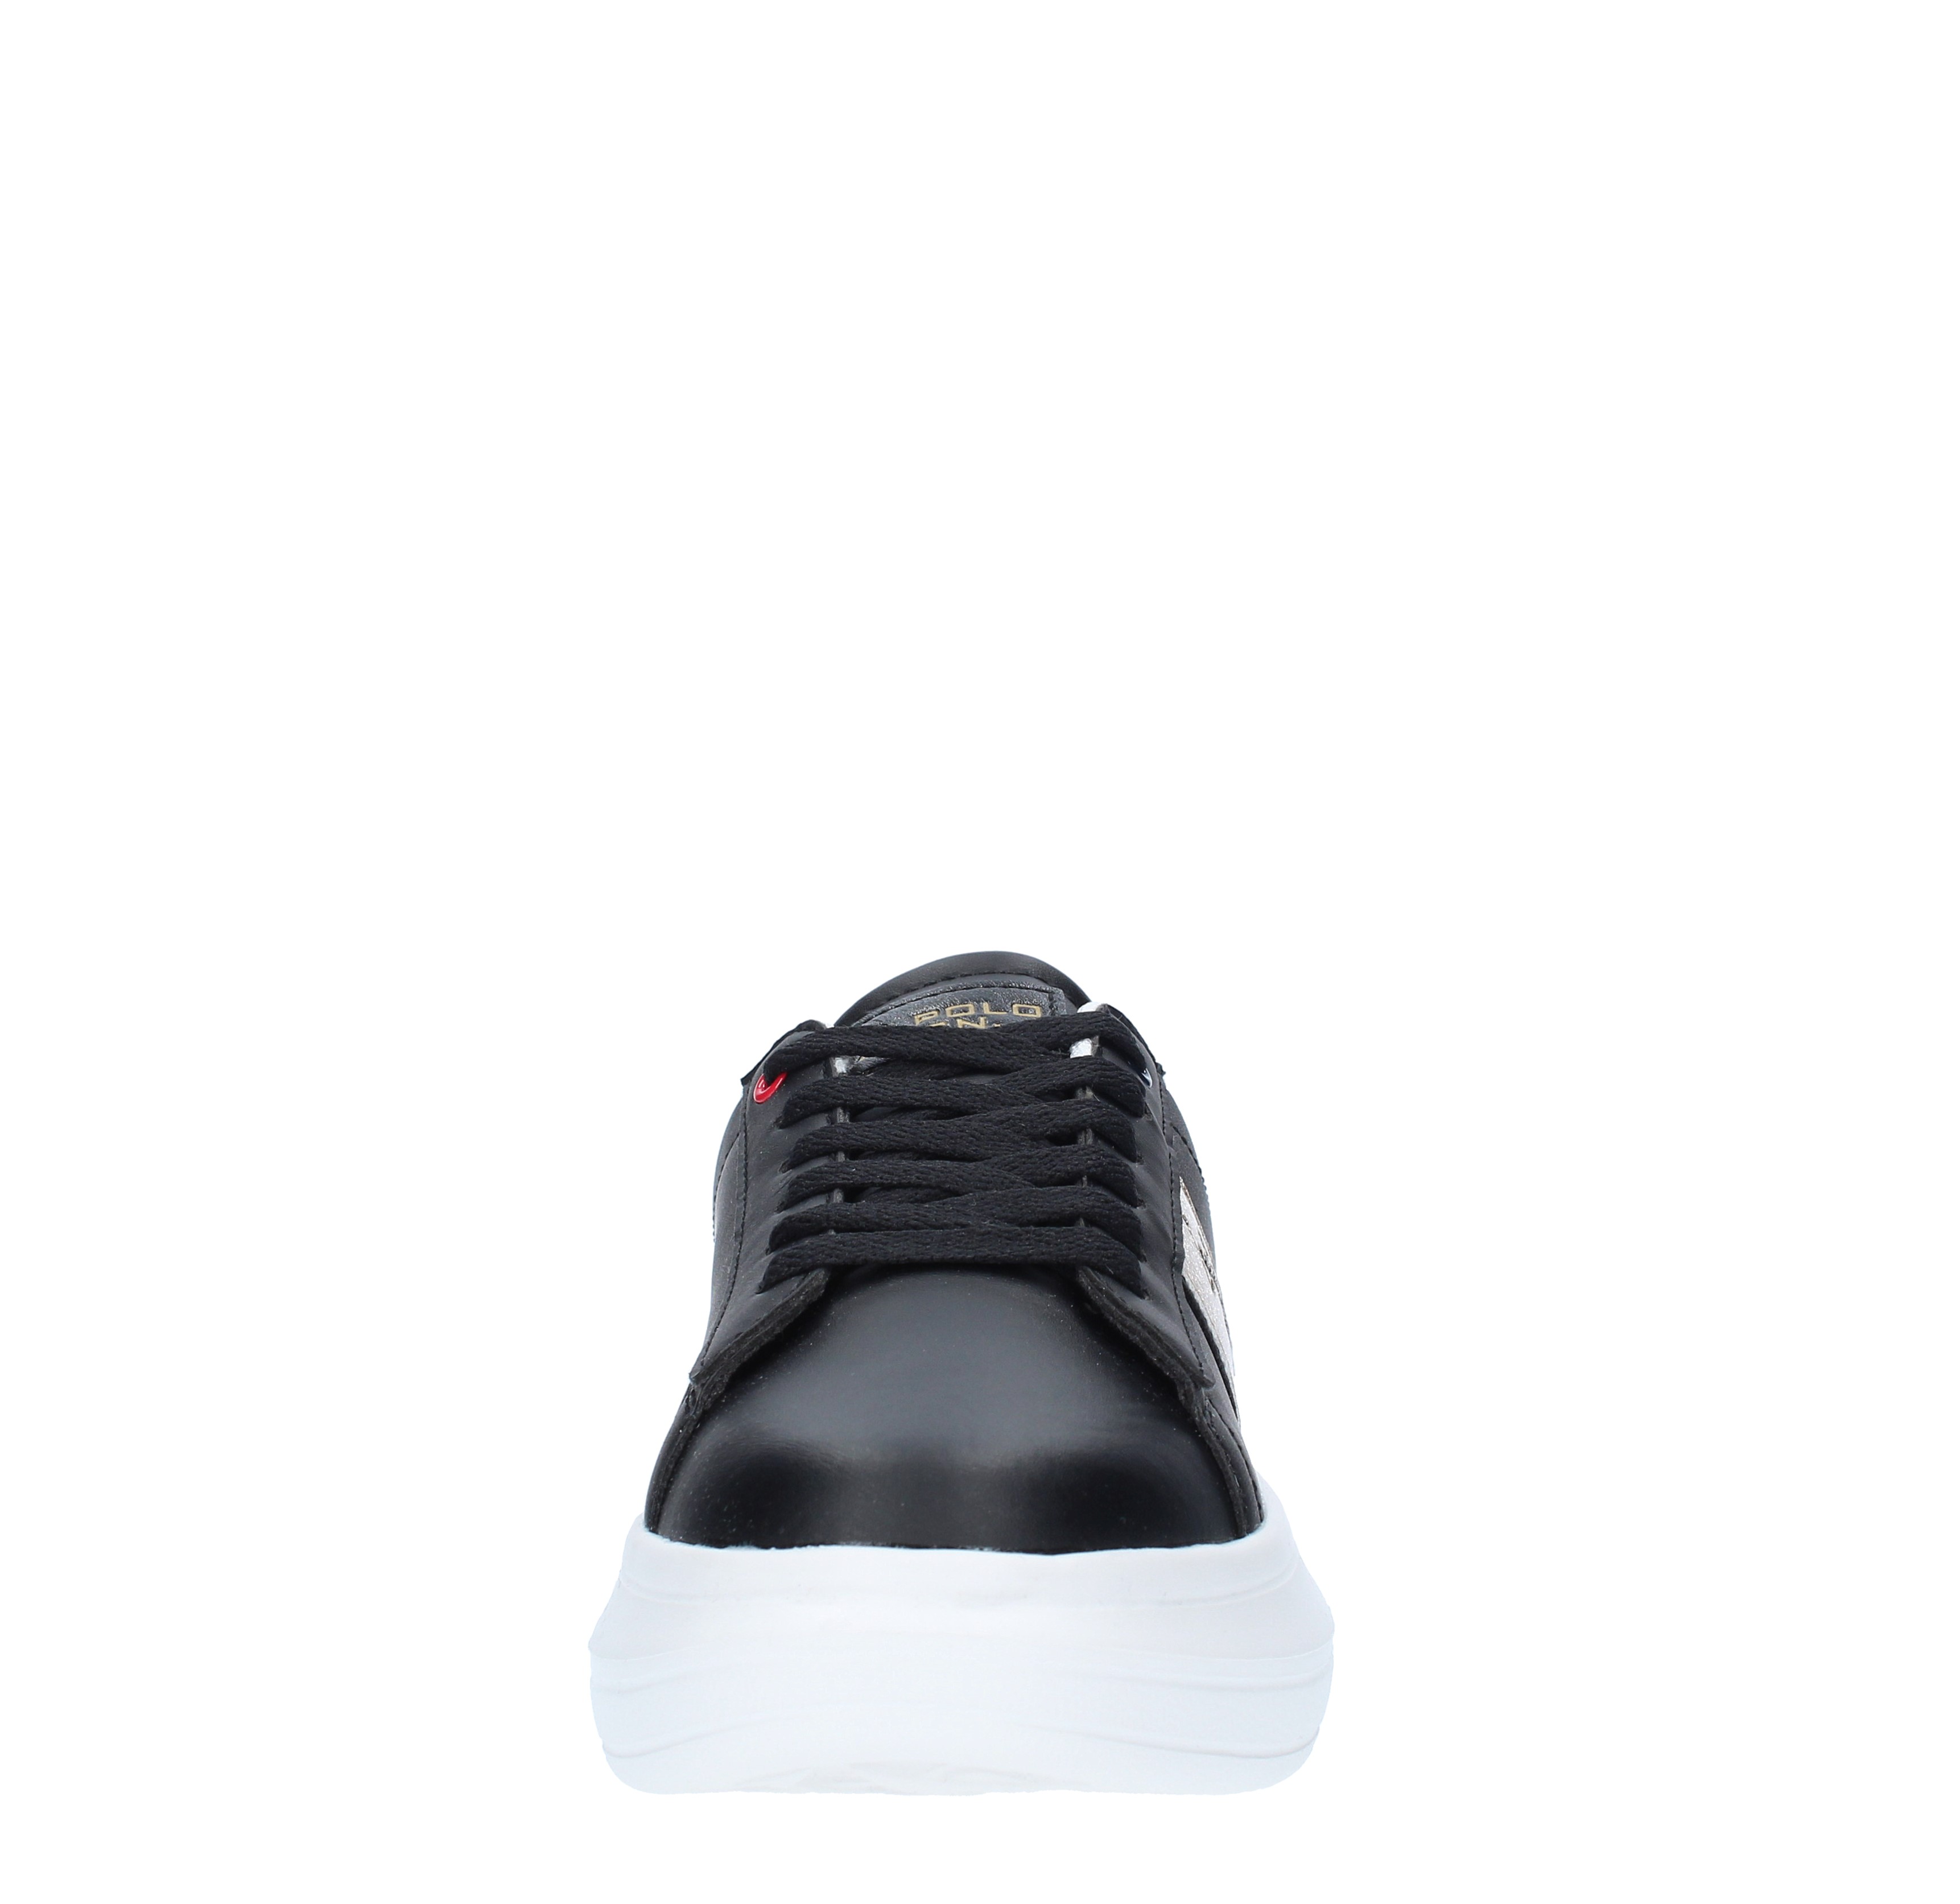 Faux leather trainers - POLO RALPH LAUREN - Ginevra calzature